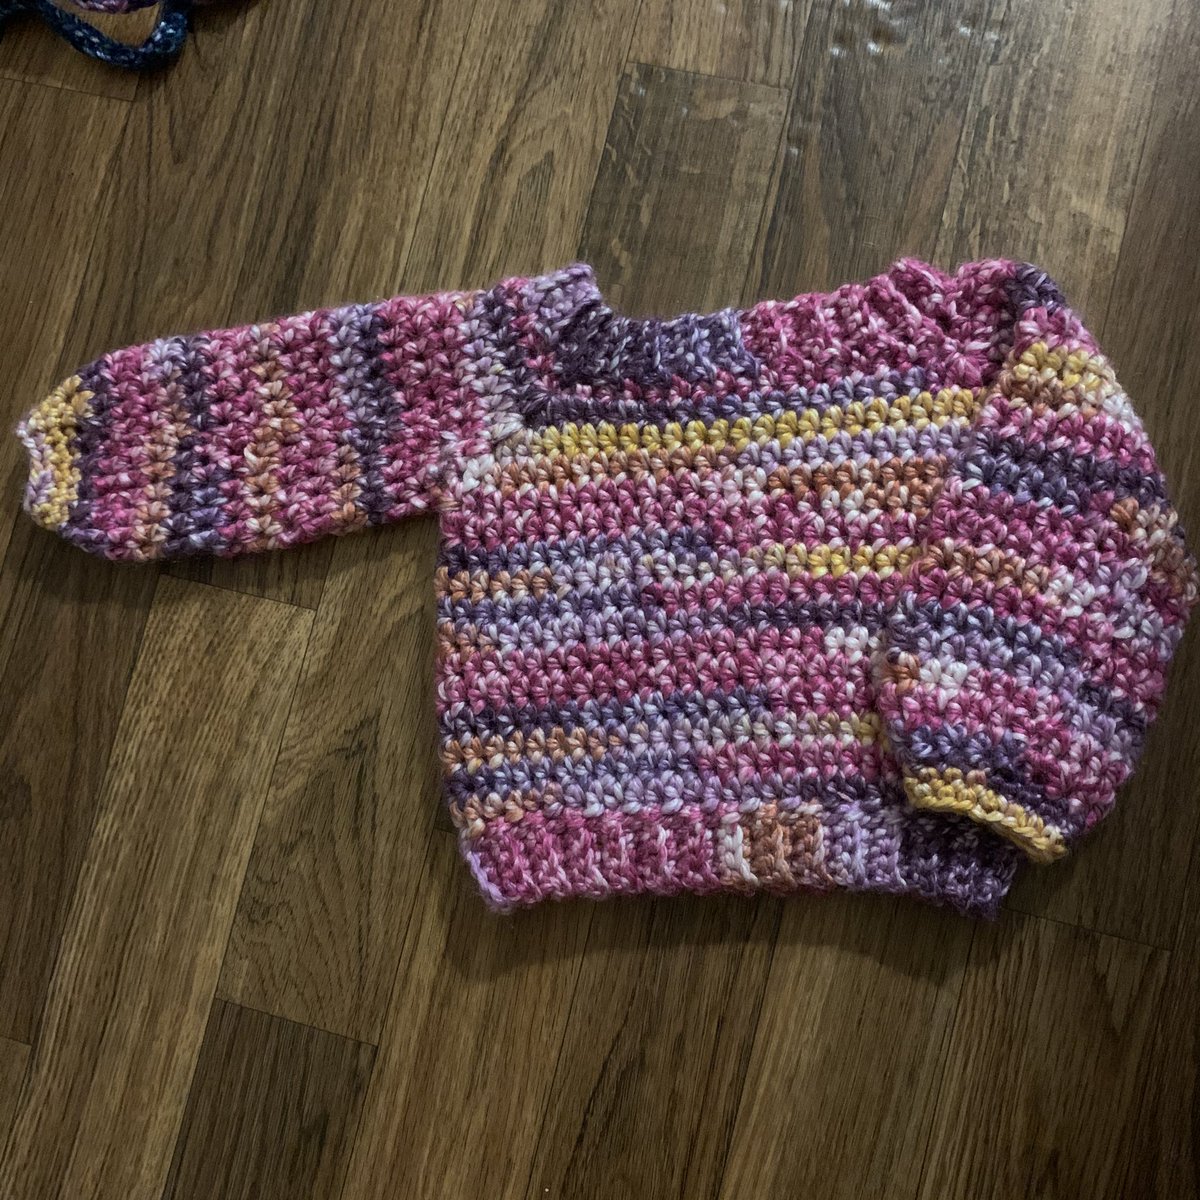 Super soft chunky pink raglan sweater100% acrylicSize 6 months$15 shipped DM to claim